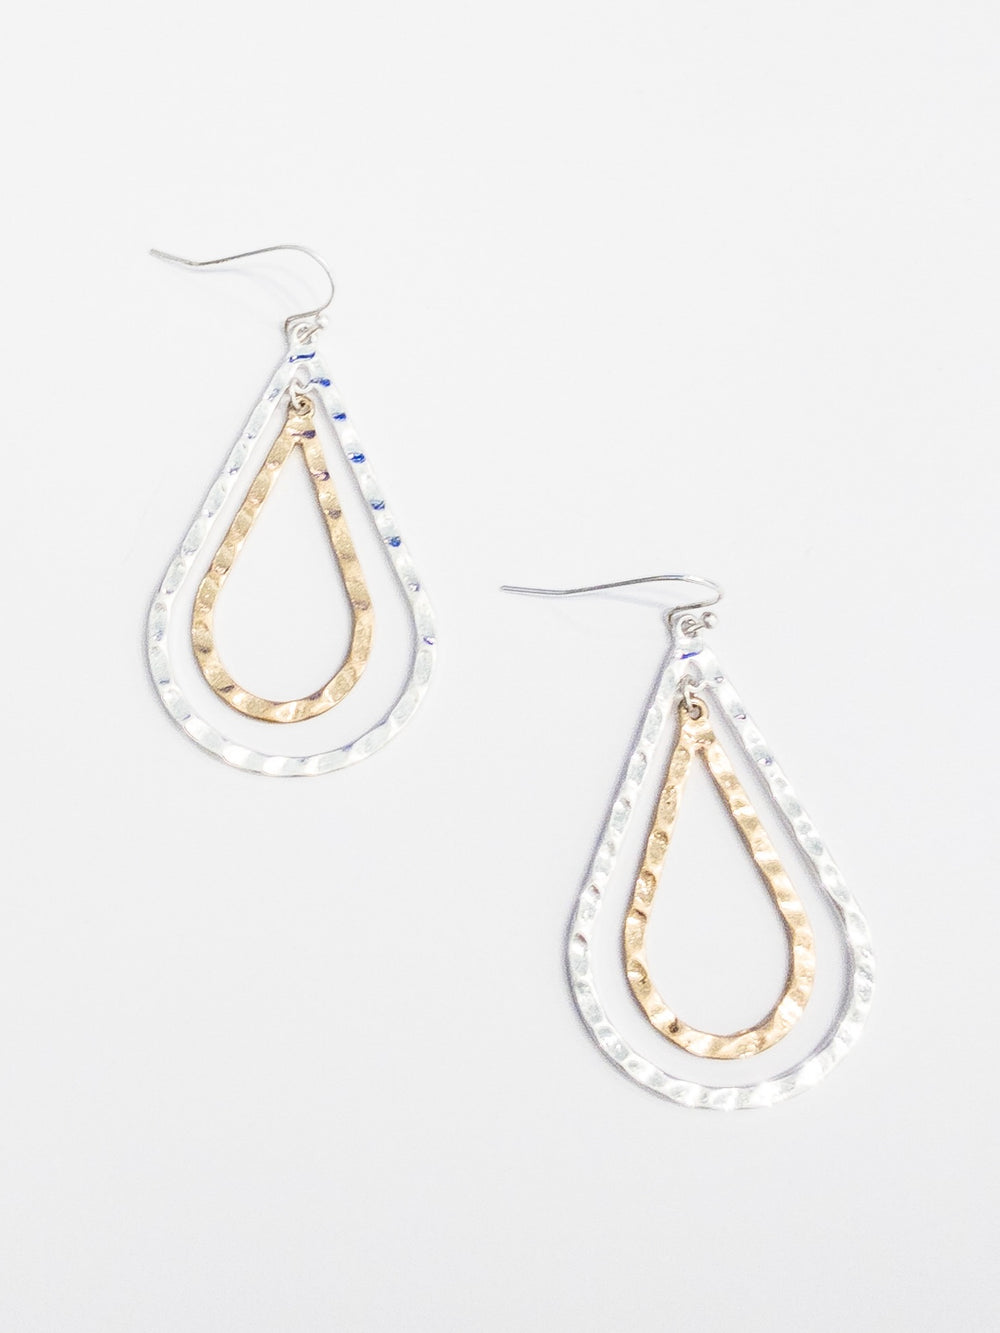 Lara dangle earrings with a gold and silver feature hanging